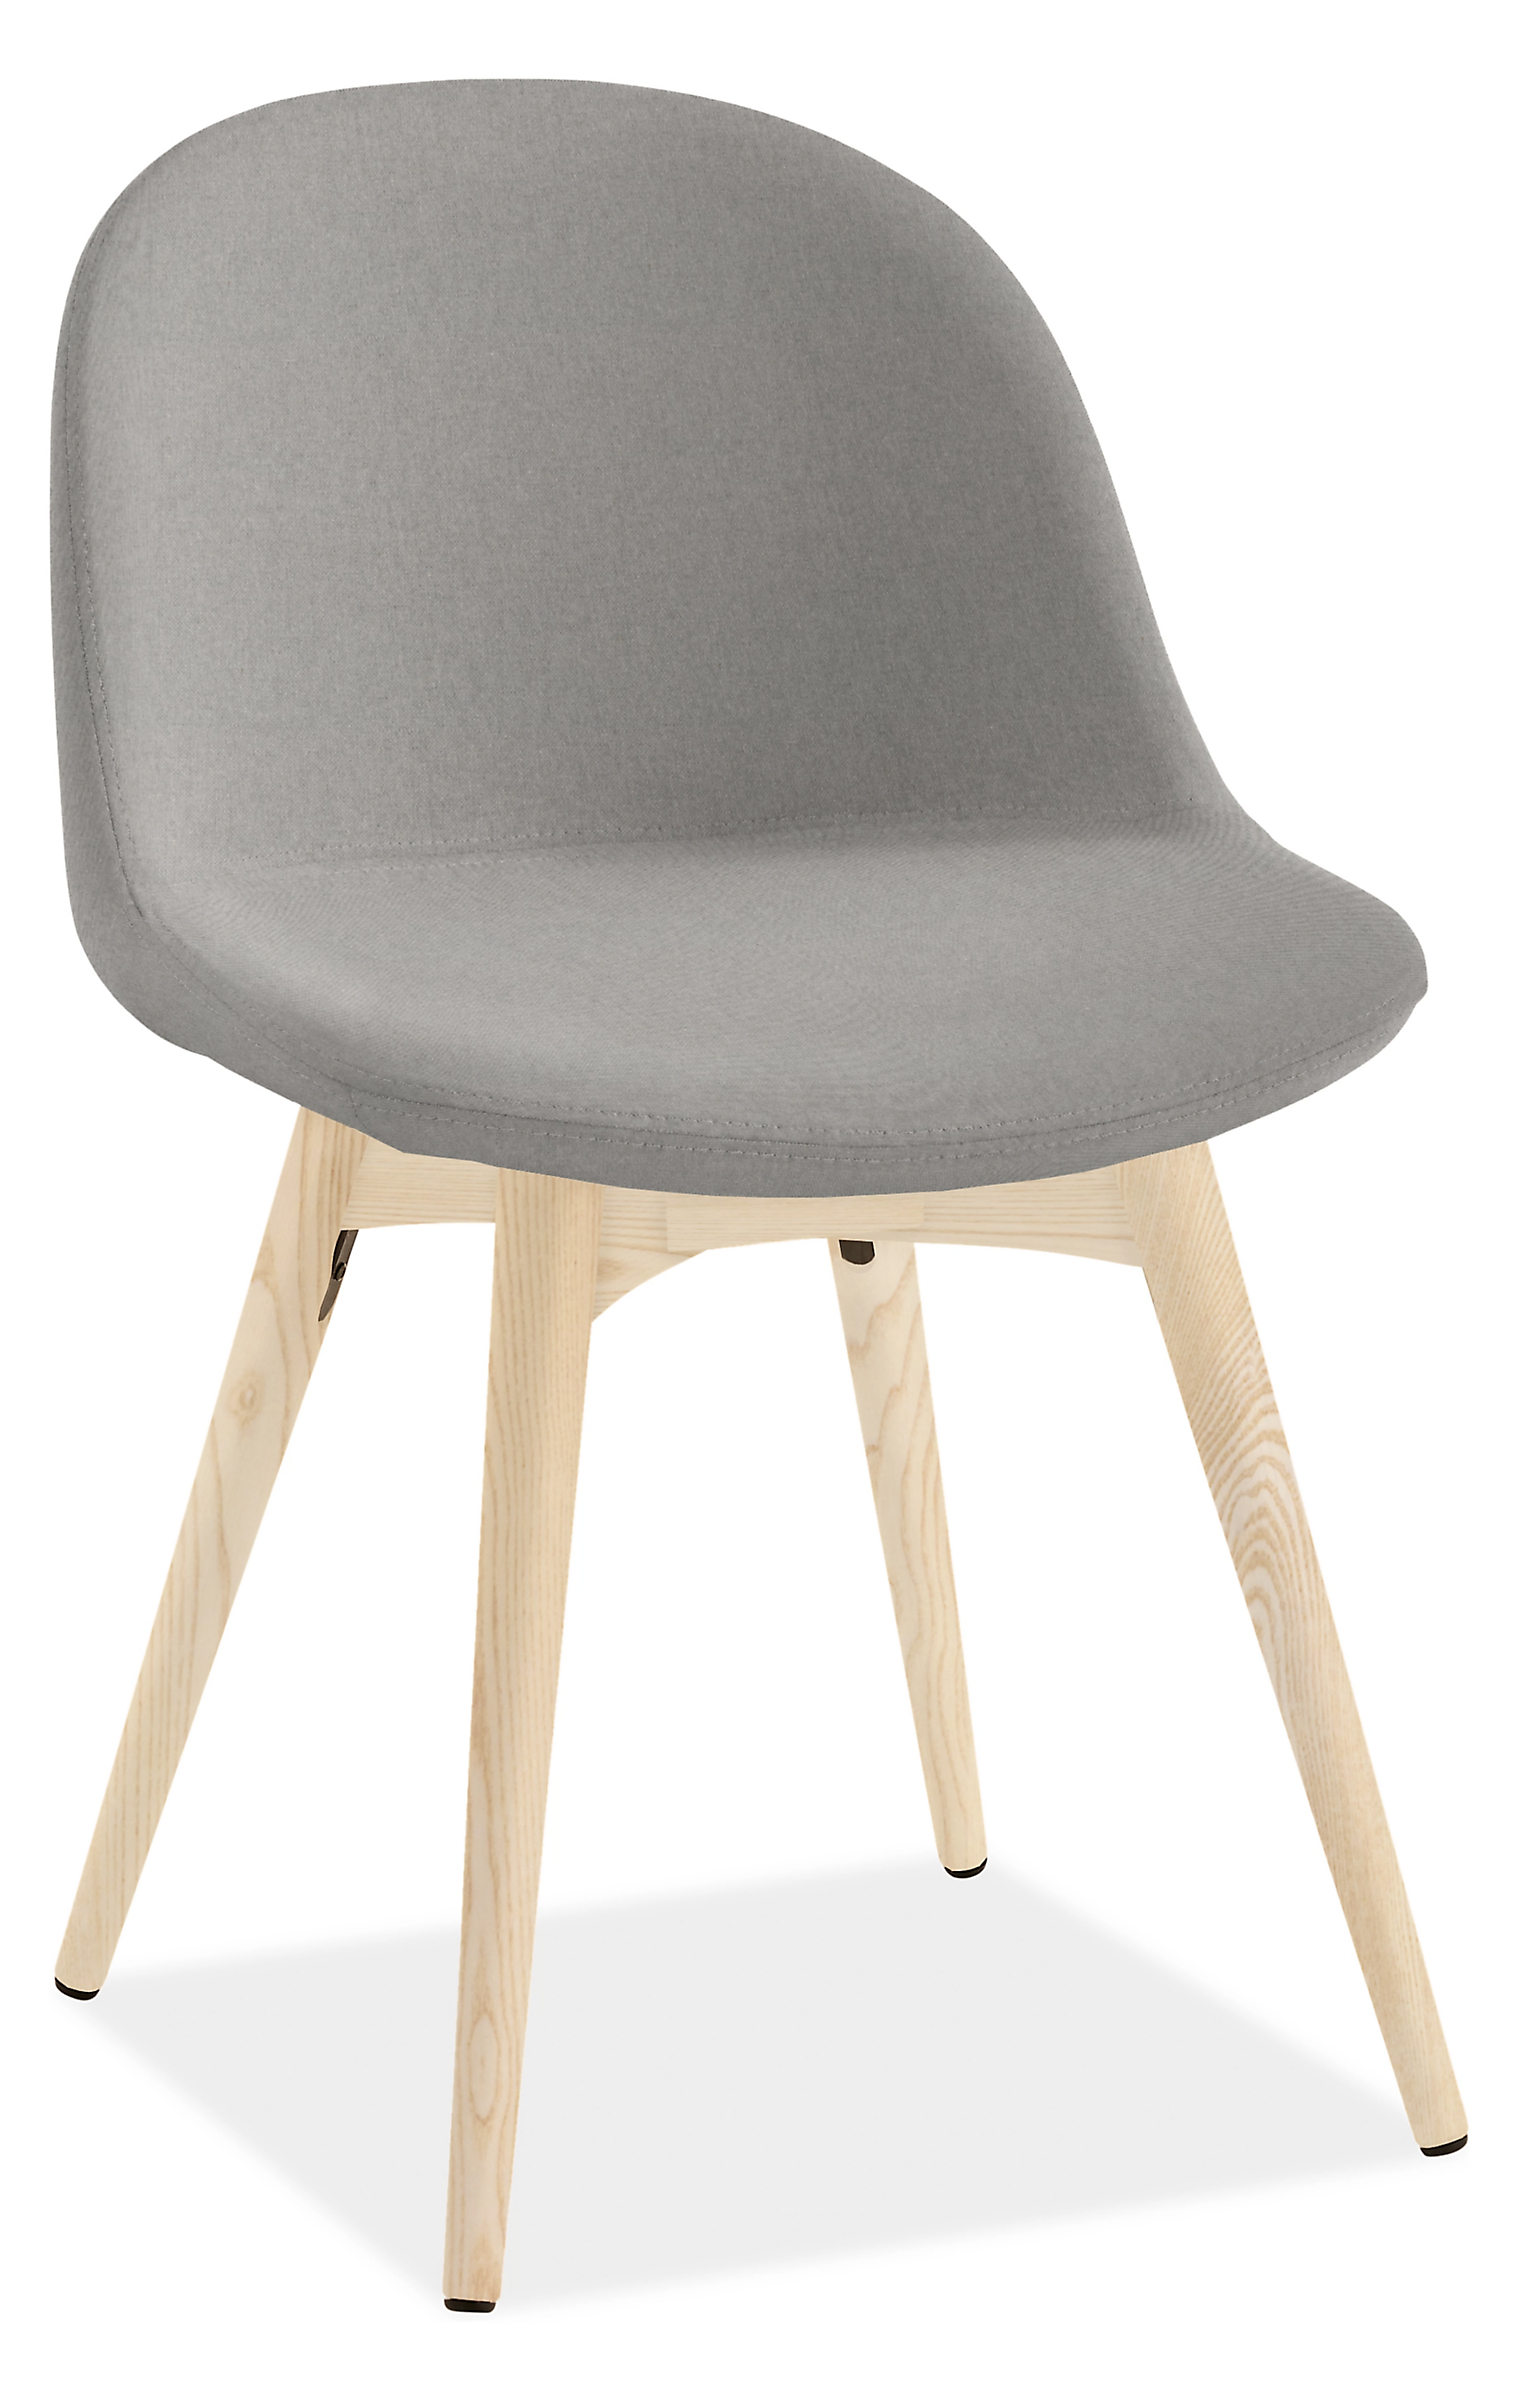 Bernard Dining Chair in Creel Cement Fabric with Ash Wood Legs